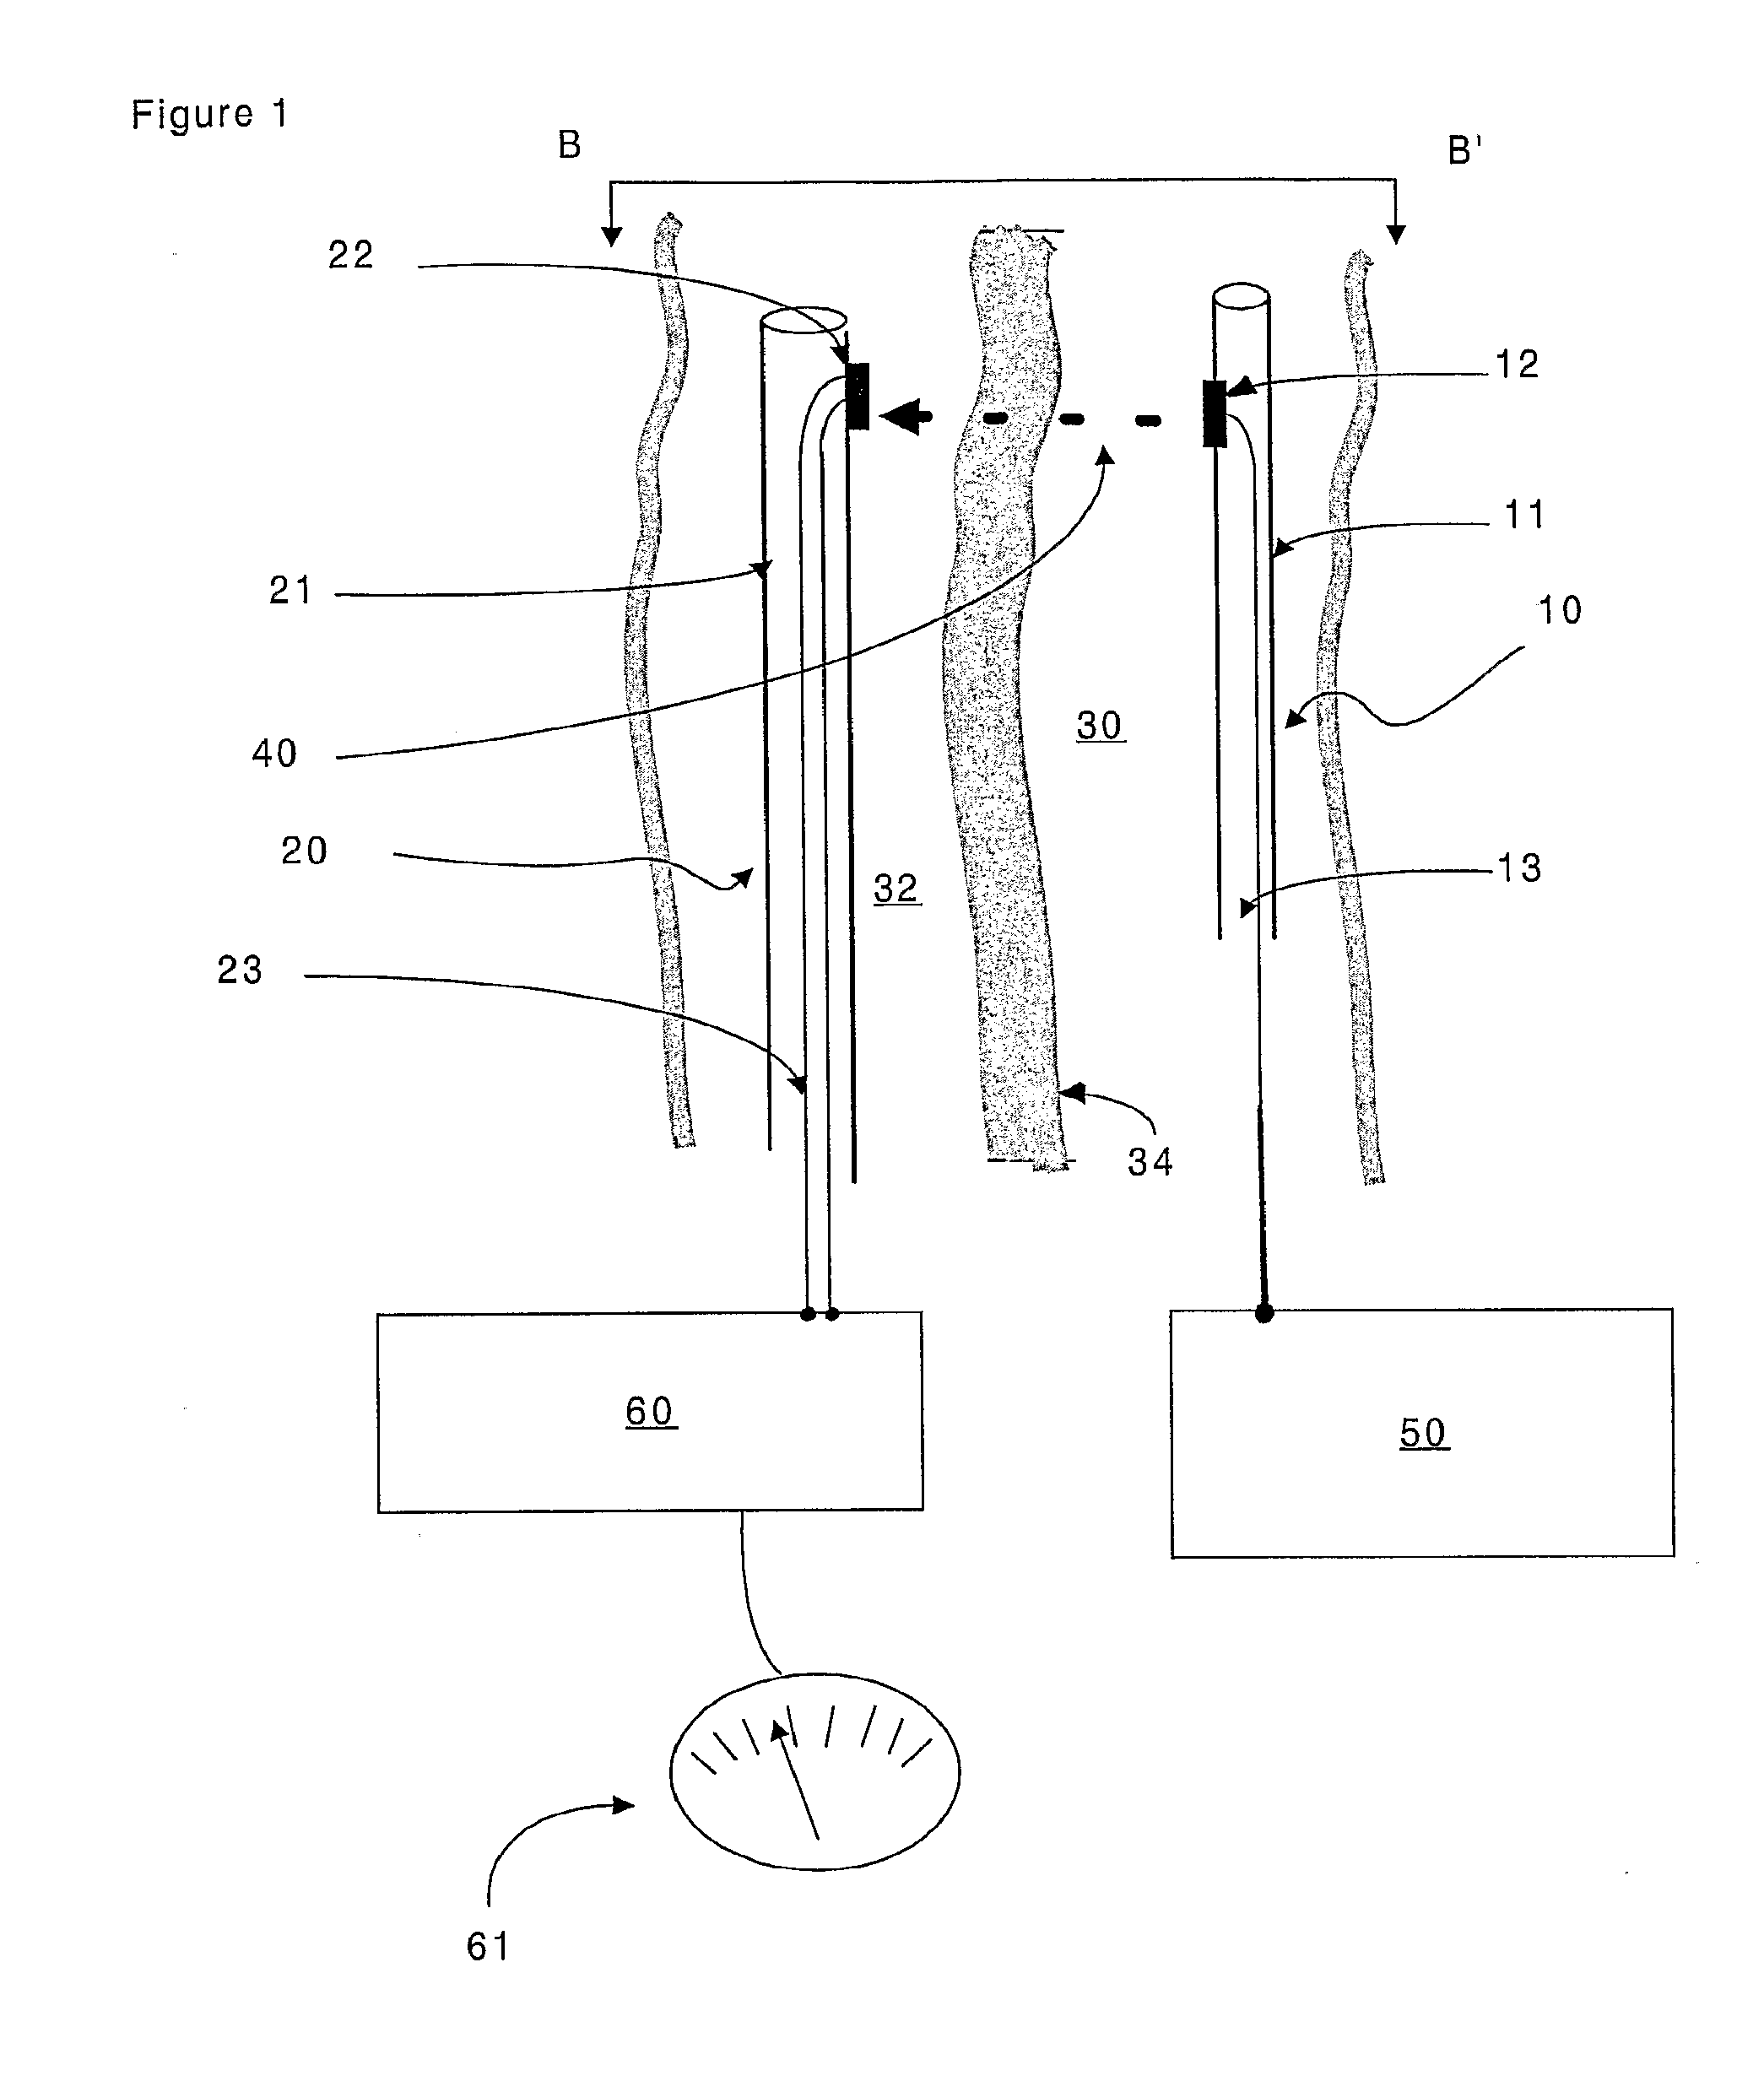 Minimally invasive surgical apparatus and methods